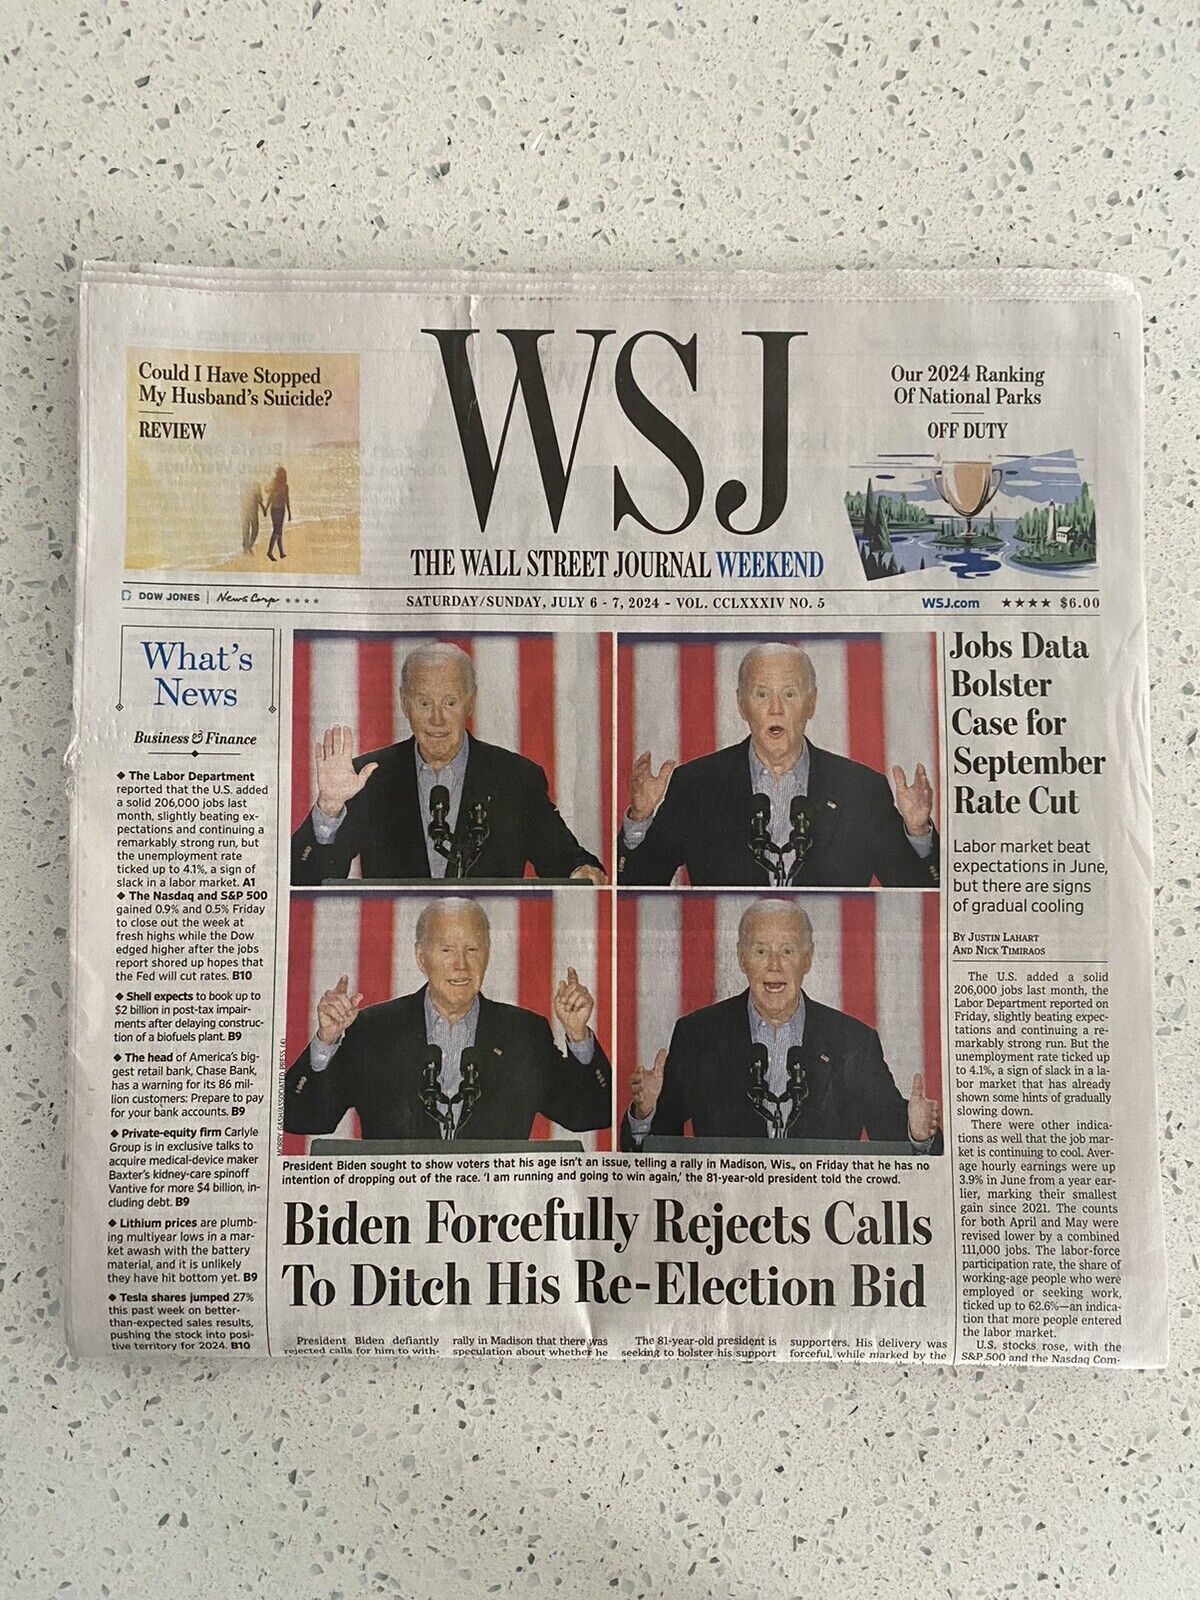 The Wall Street Journal Saturday, July 6 - 7, 2024 Complete Print Newspaper NEW